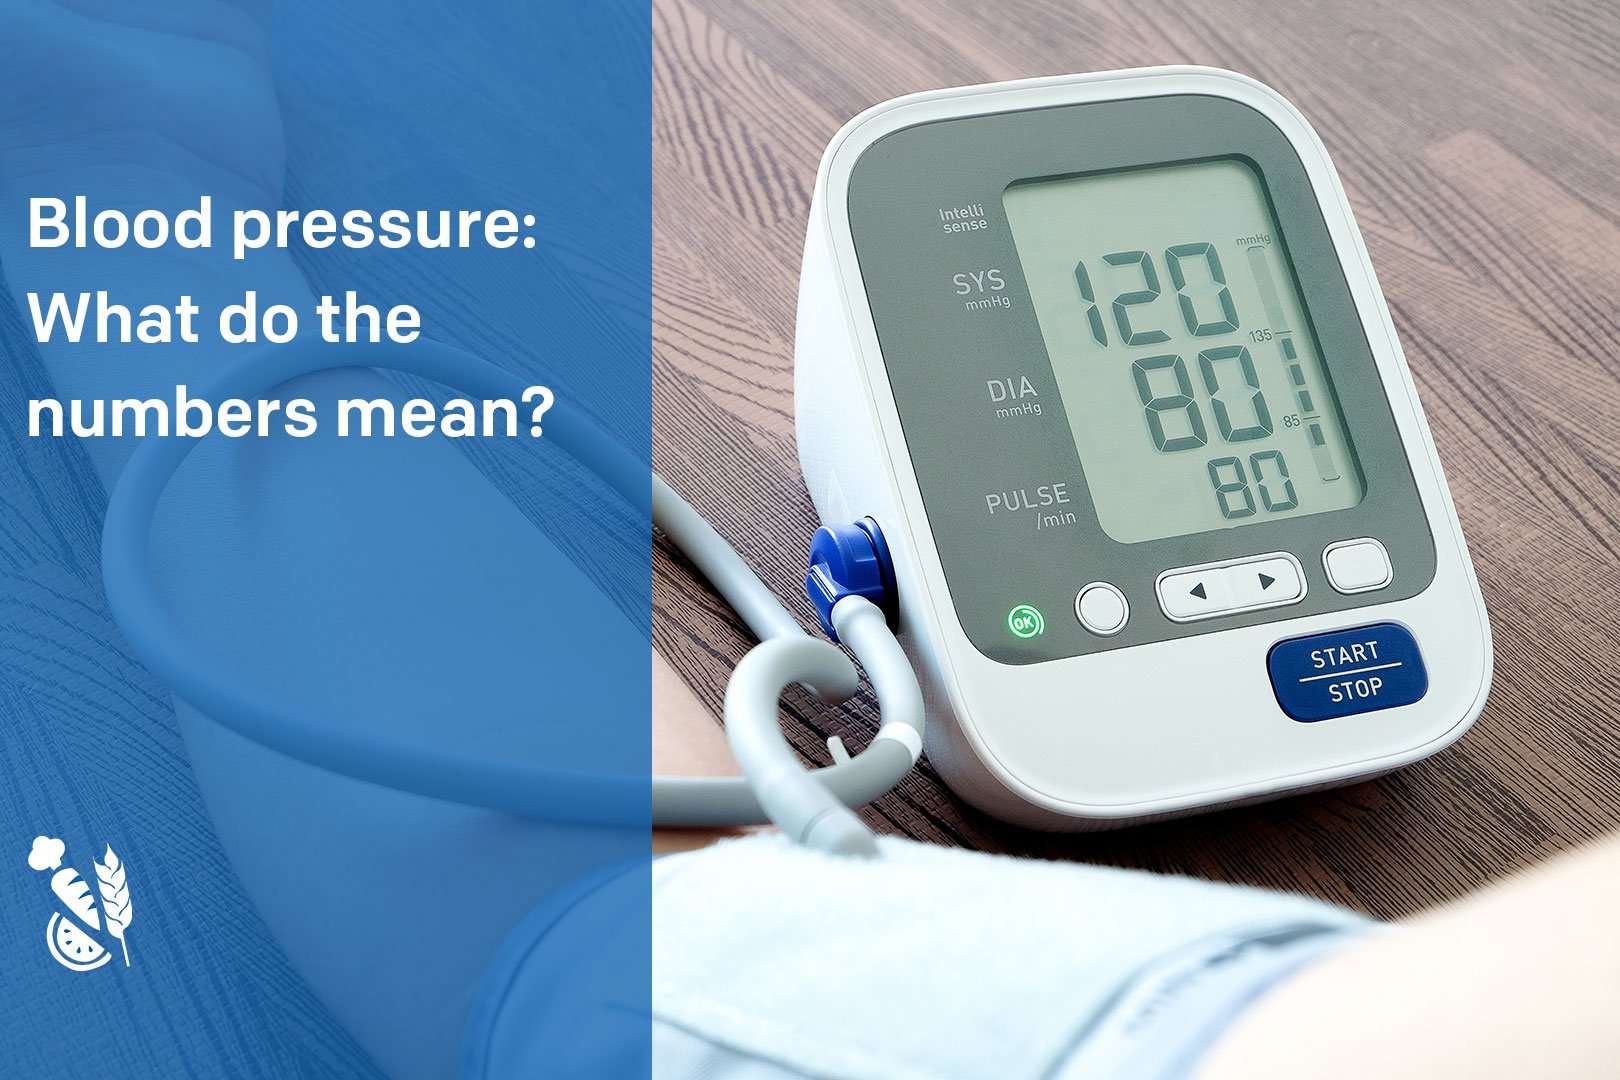 Blood pressure: What do the numbers mean?